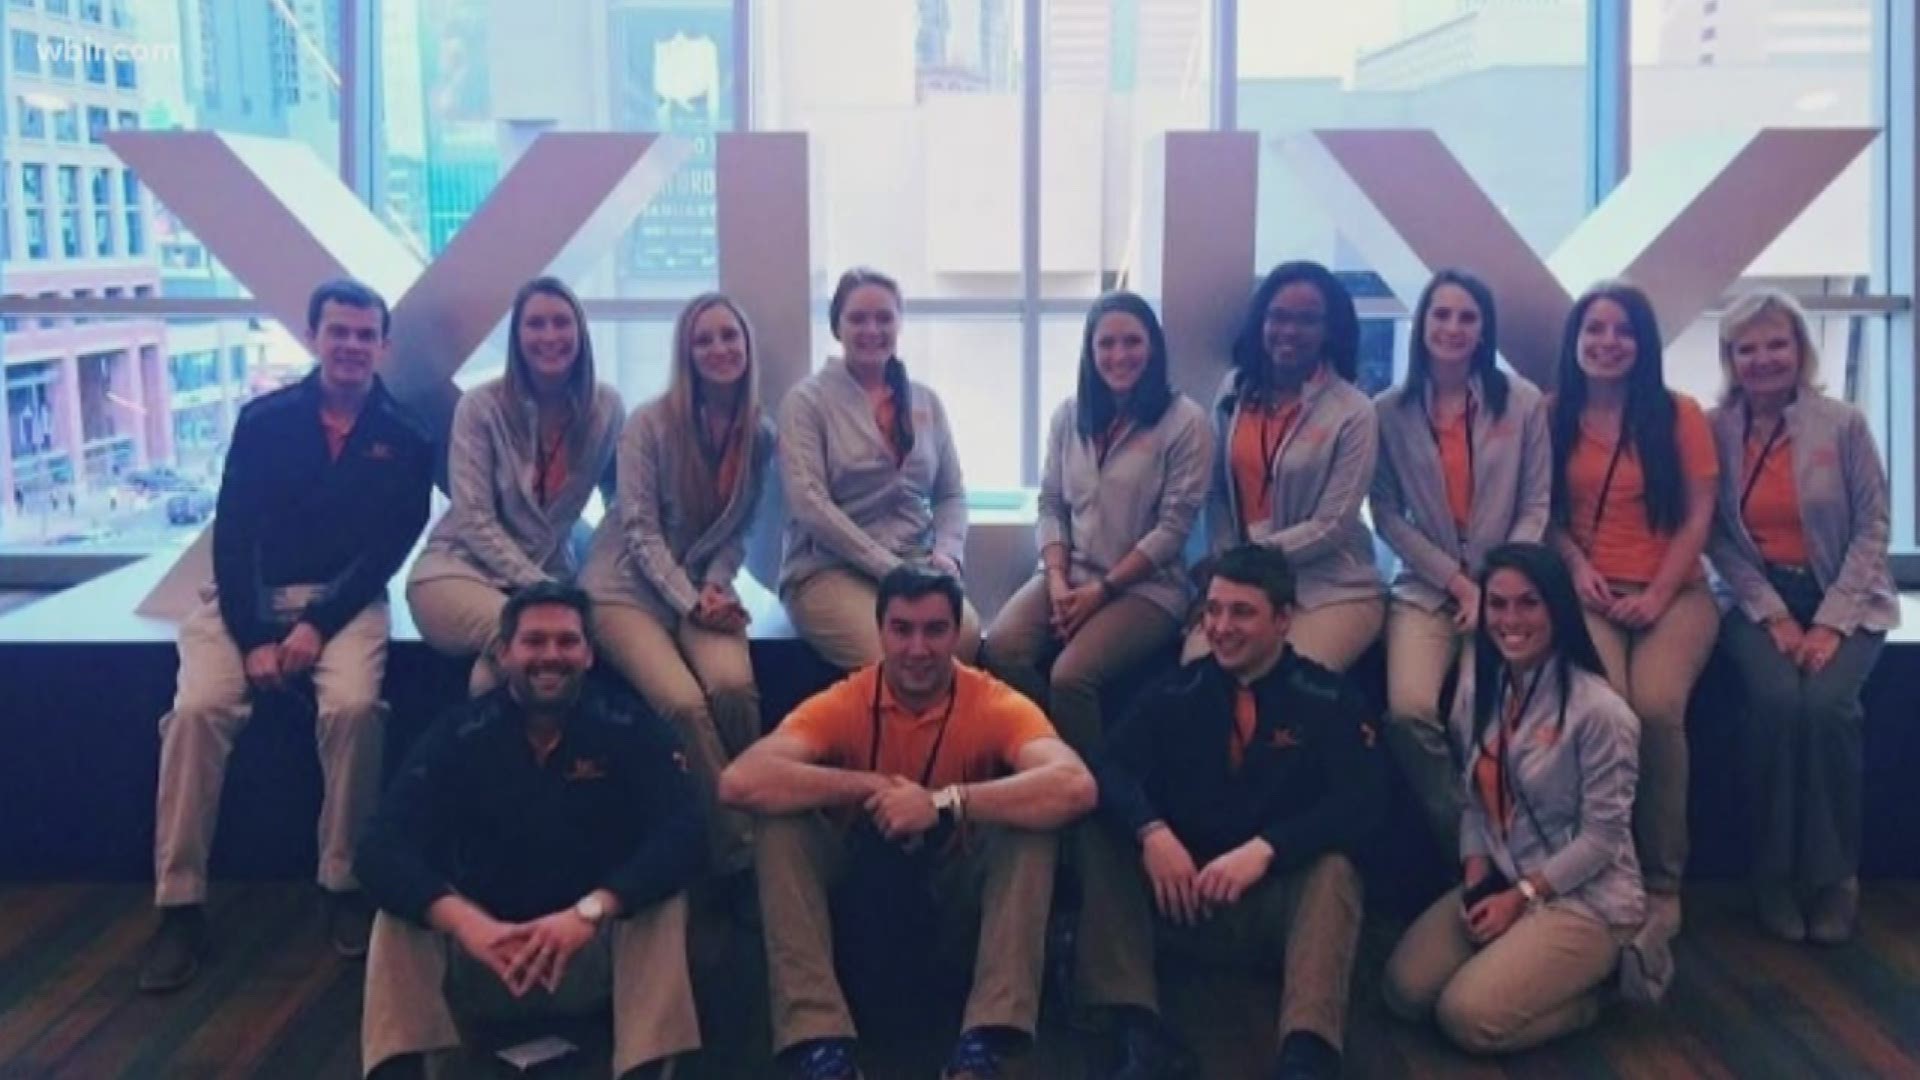 A group of UT students will be behind the scenes when the Super Bowl kicks off on February 2.